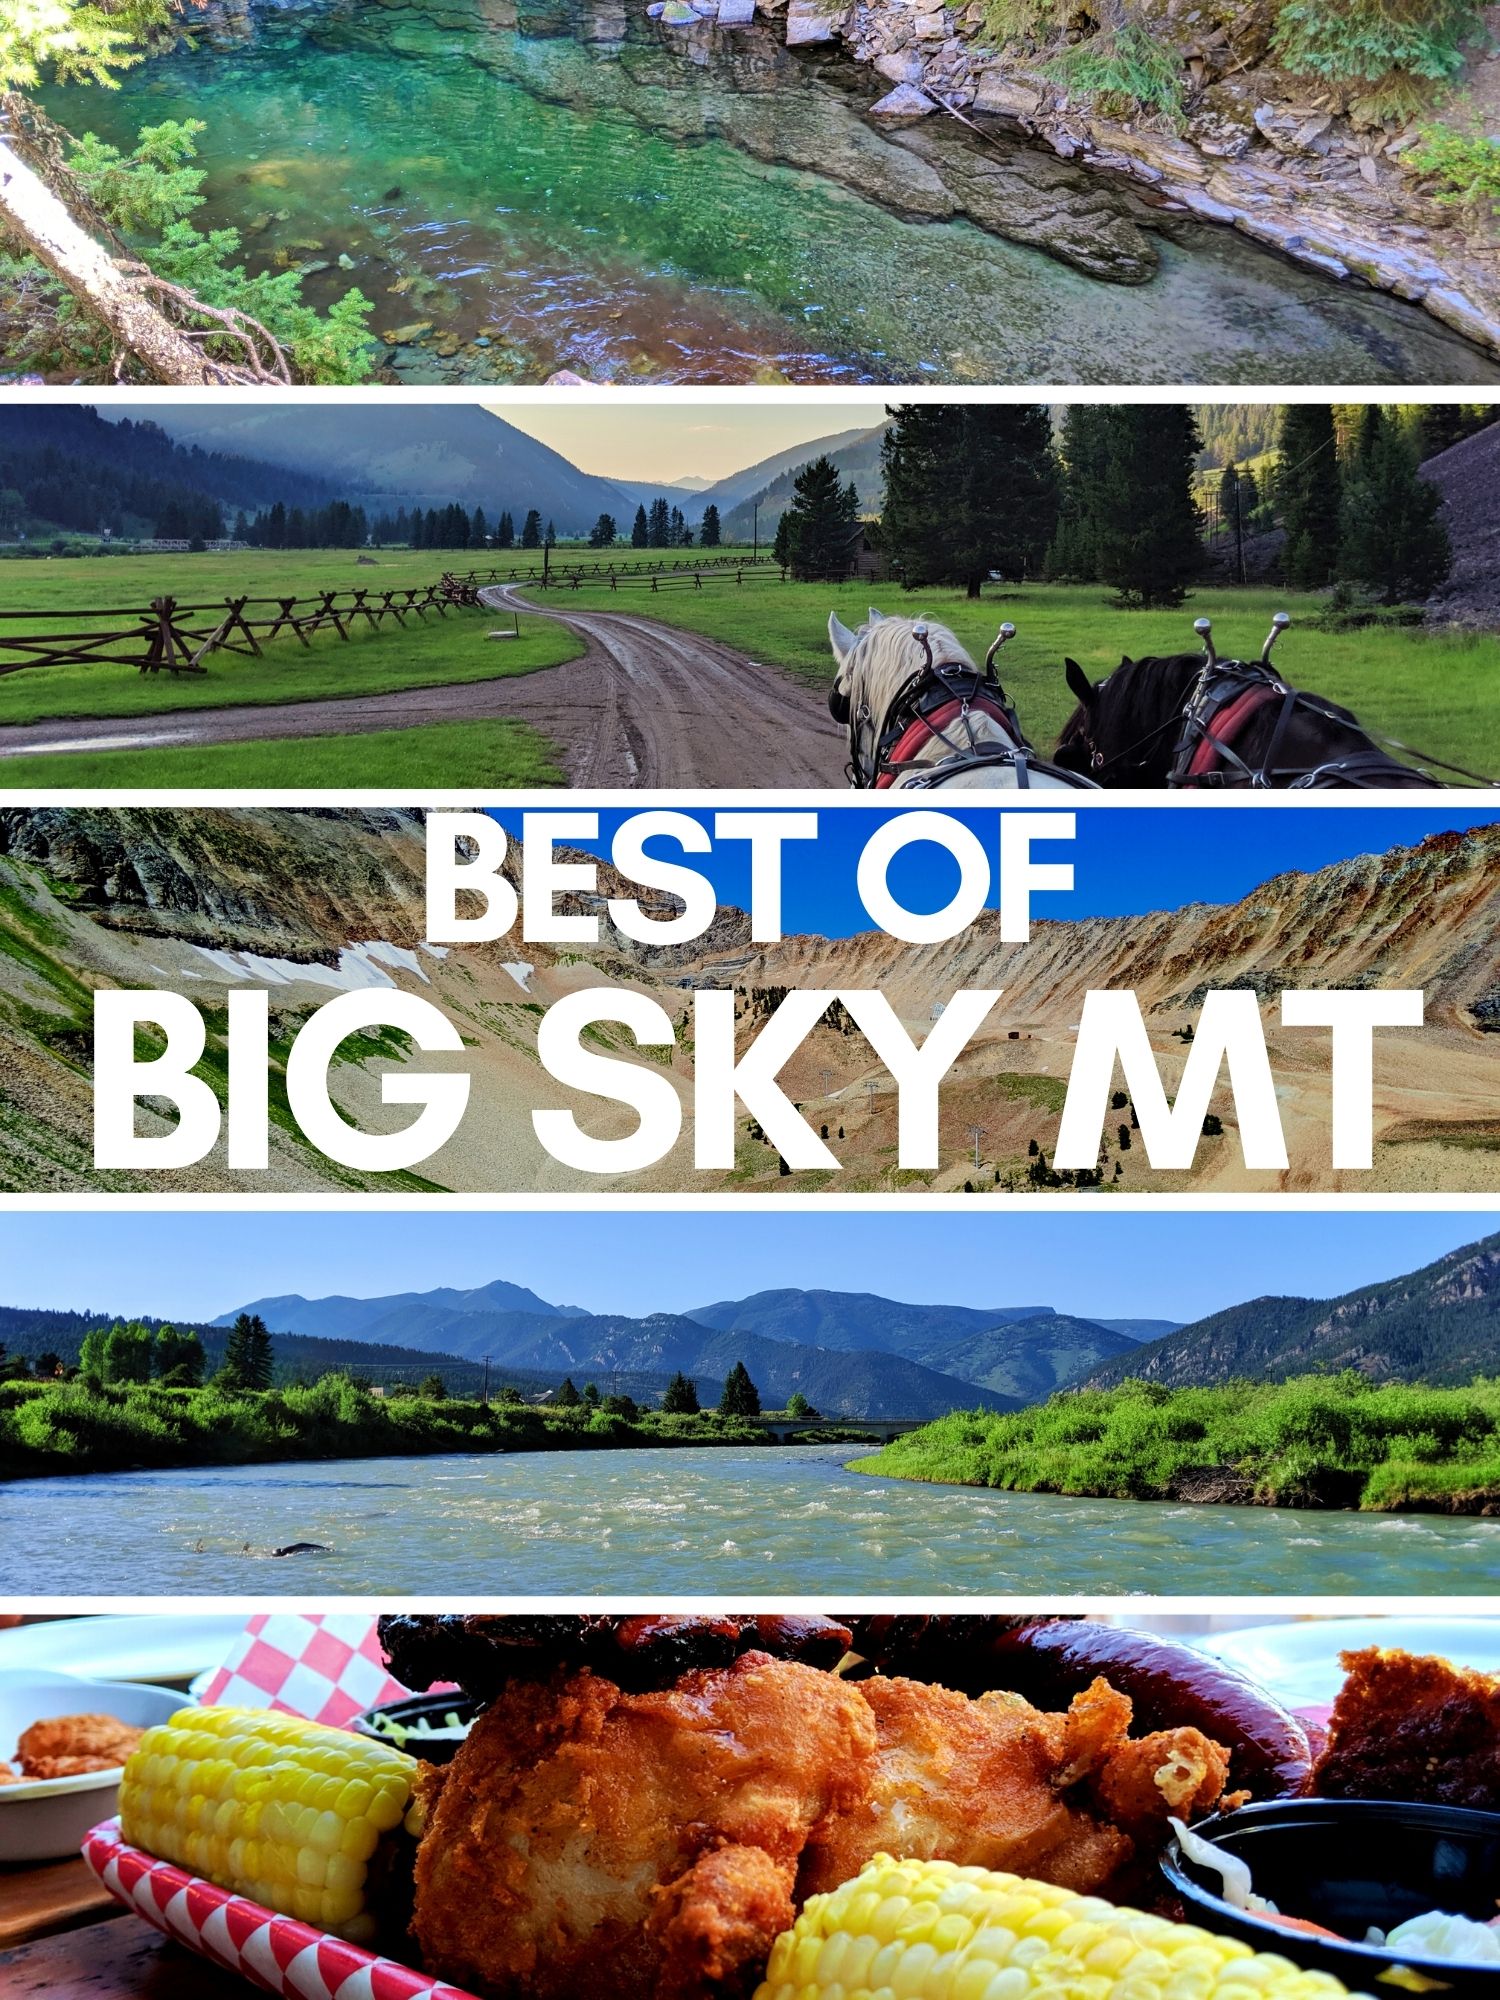 Big Sky Montana is full of things to do besides skiing. Summer weather is great for visiting Yellowstone, hiking trails to waterfalls, horseback riding, the best BBQ in Montana and more. Very nice resorts and lodging.